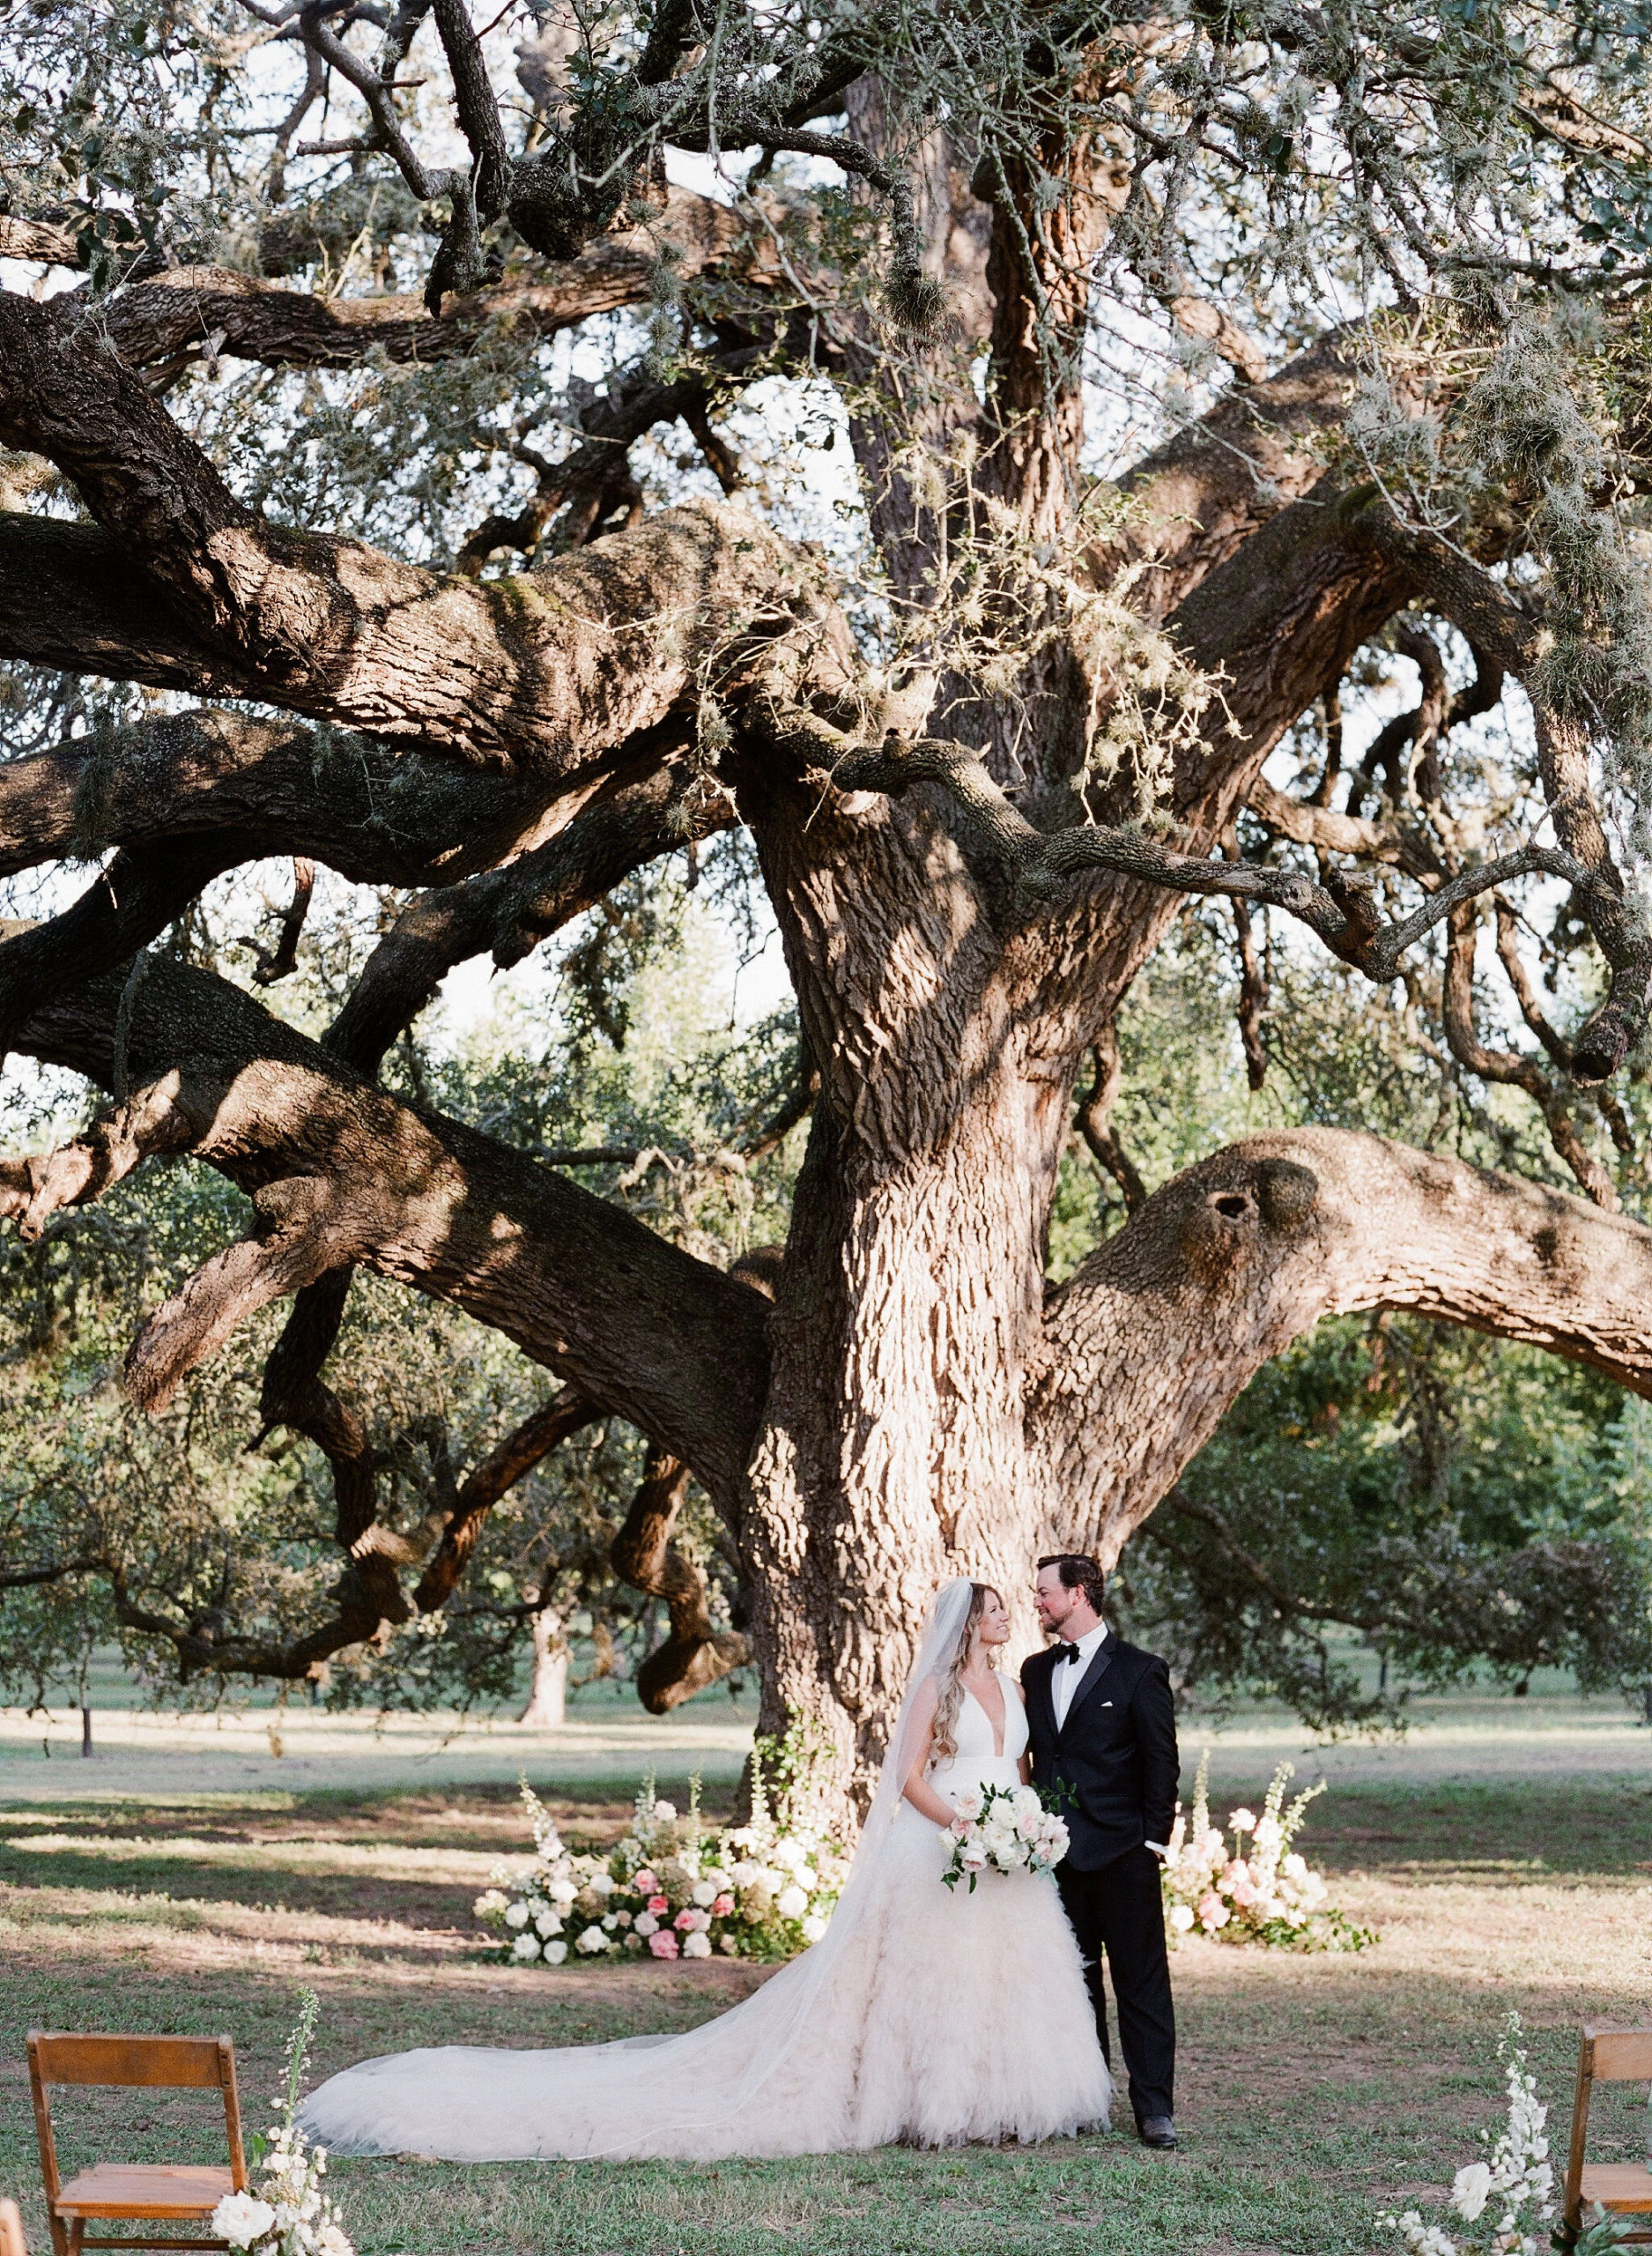 Texas Private Estate Wedding During Covid BW Theory Matthew Moore Photography 21.jpg